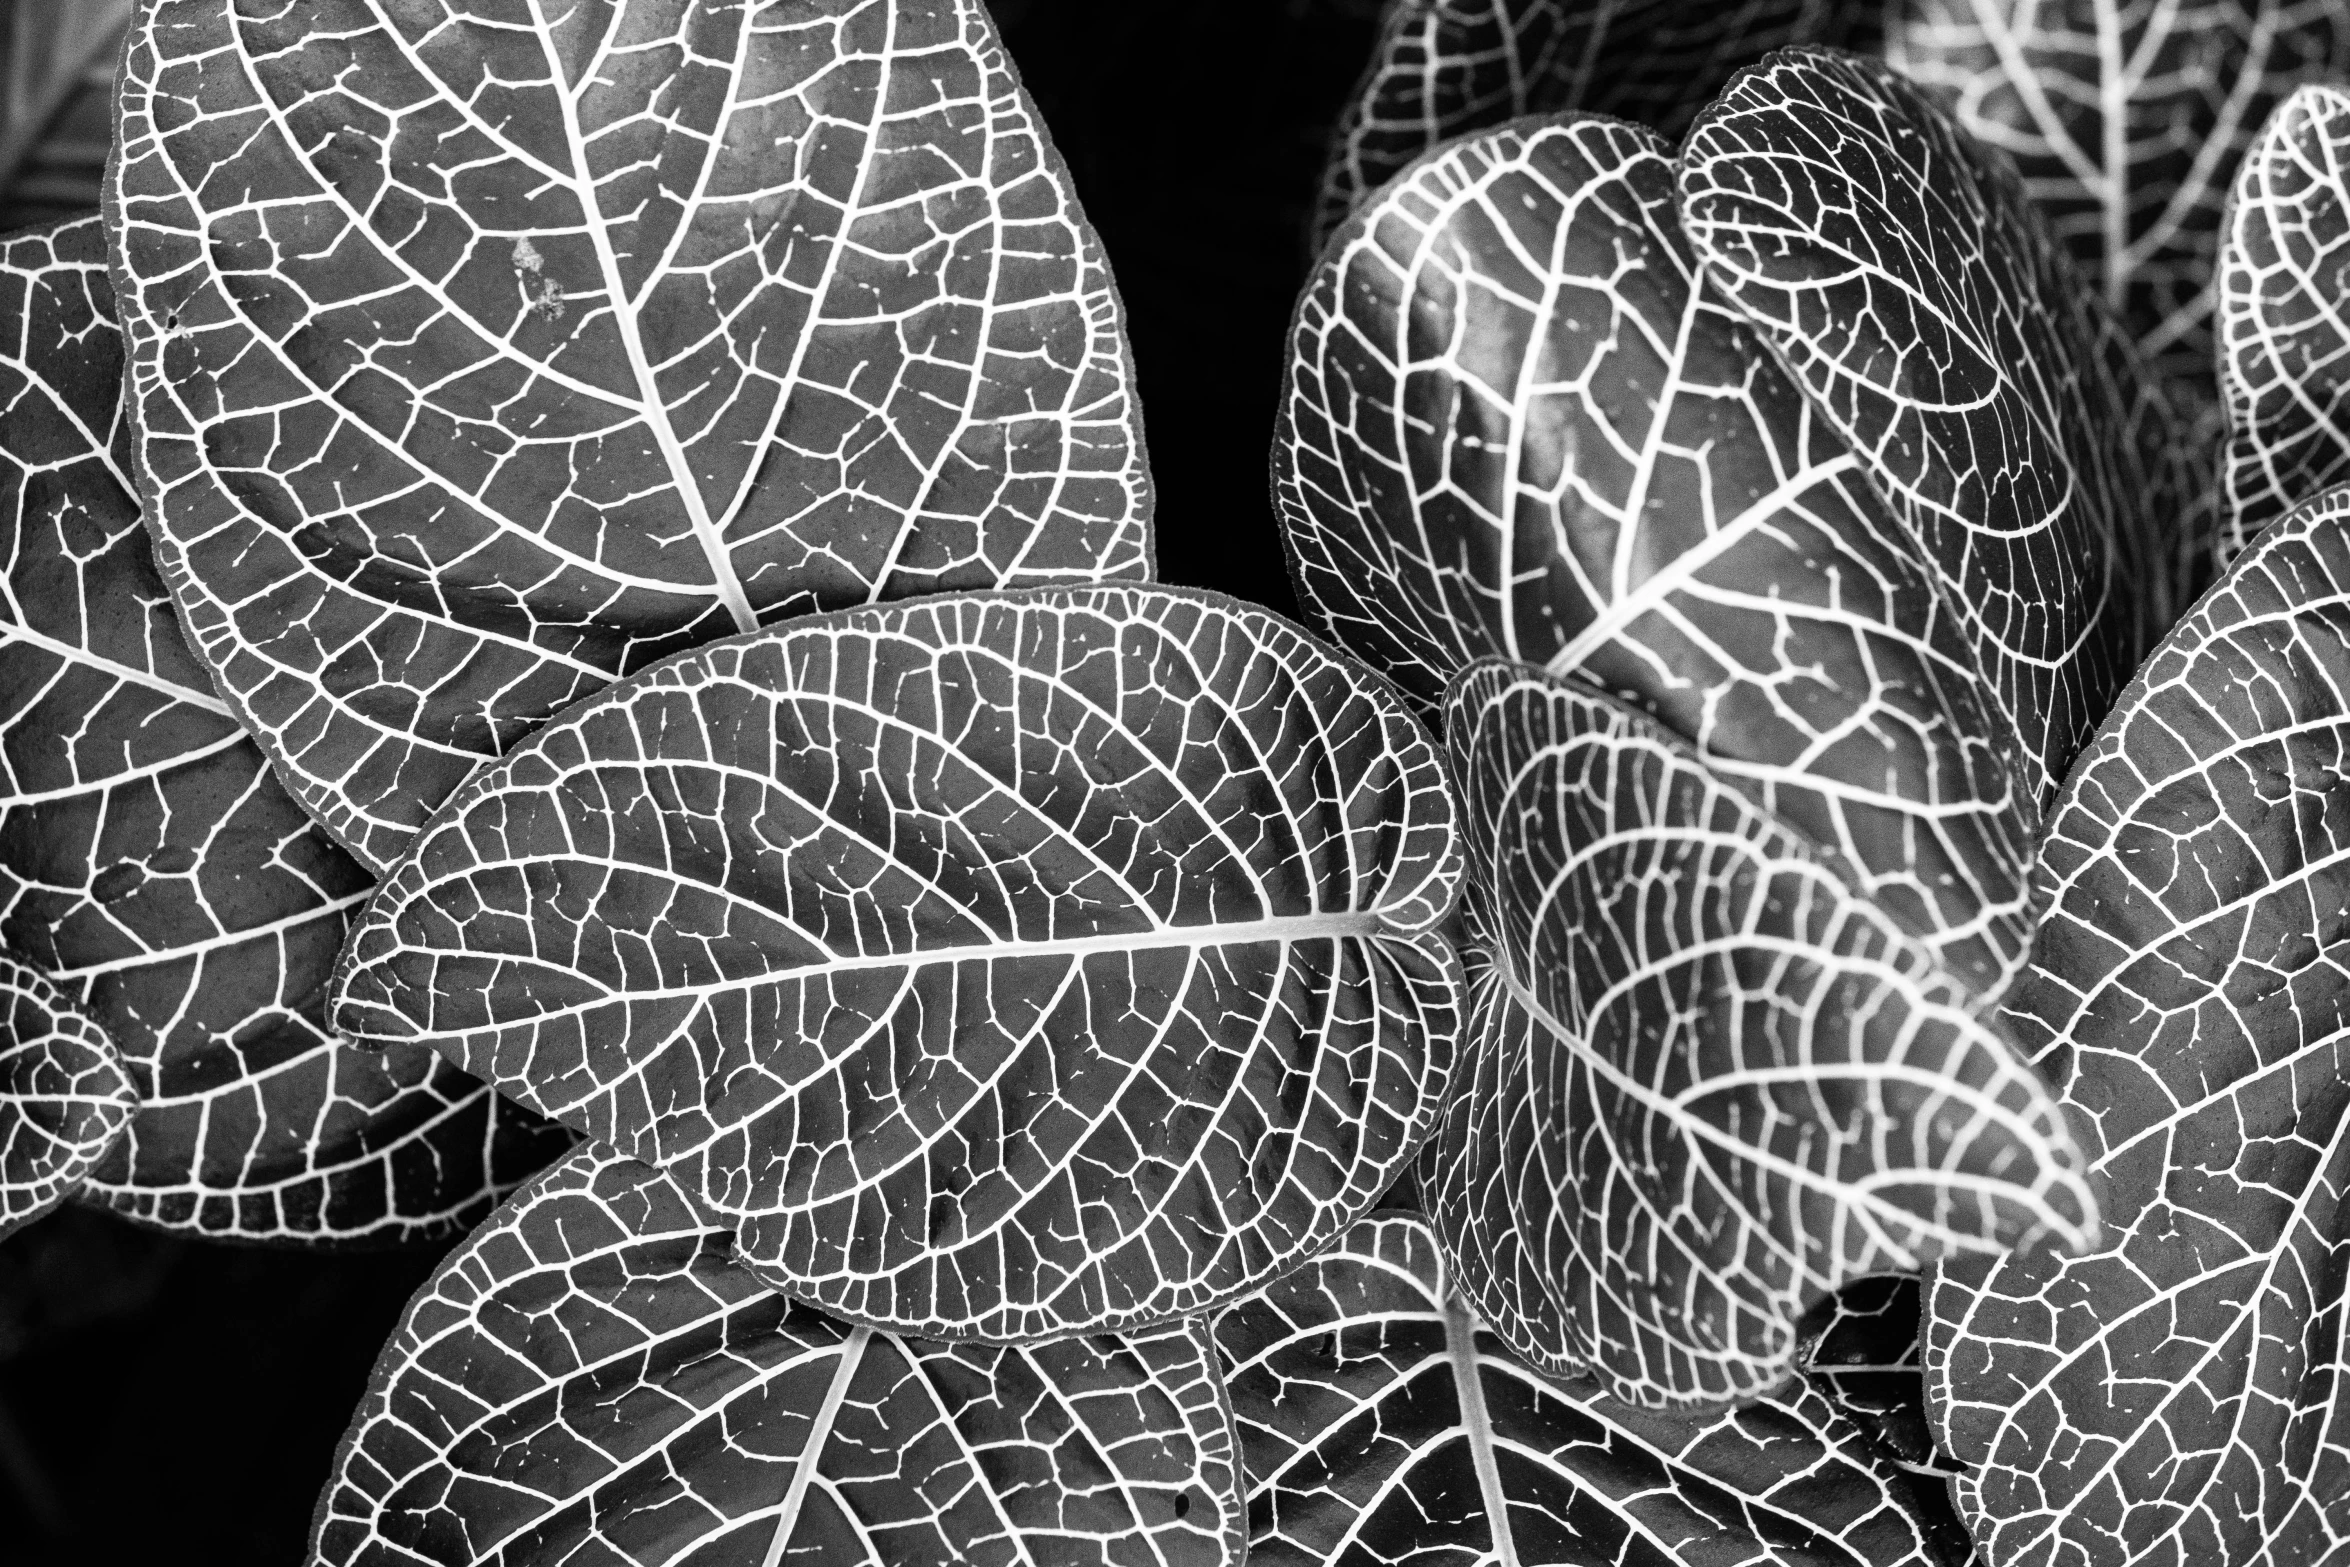 black and white image of leafy plants